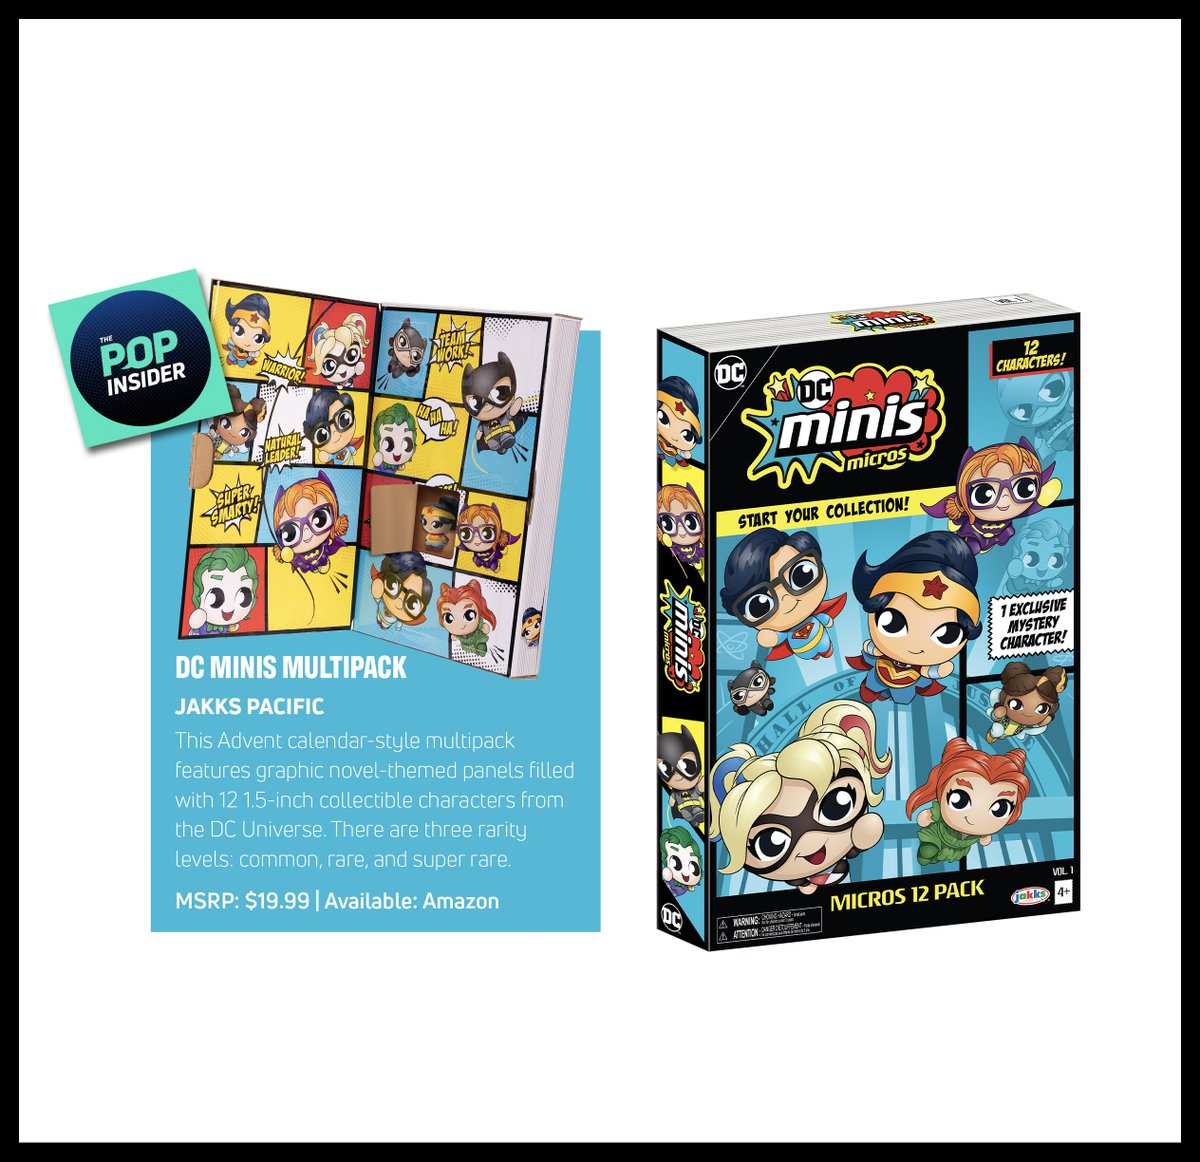 We are proud to announce that Jakks' DC Minis Micros Multipack has been chosen as a Best Gift for Next-Gen Fans in @‌thepopinsider's 2023 Holiday Gift Guide! #DC #DCMinis #Micros #PopInsider #holidaygiftguide #giftguide #topgift #bestgift #2023holidaygiftguide #toys